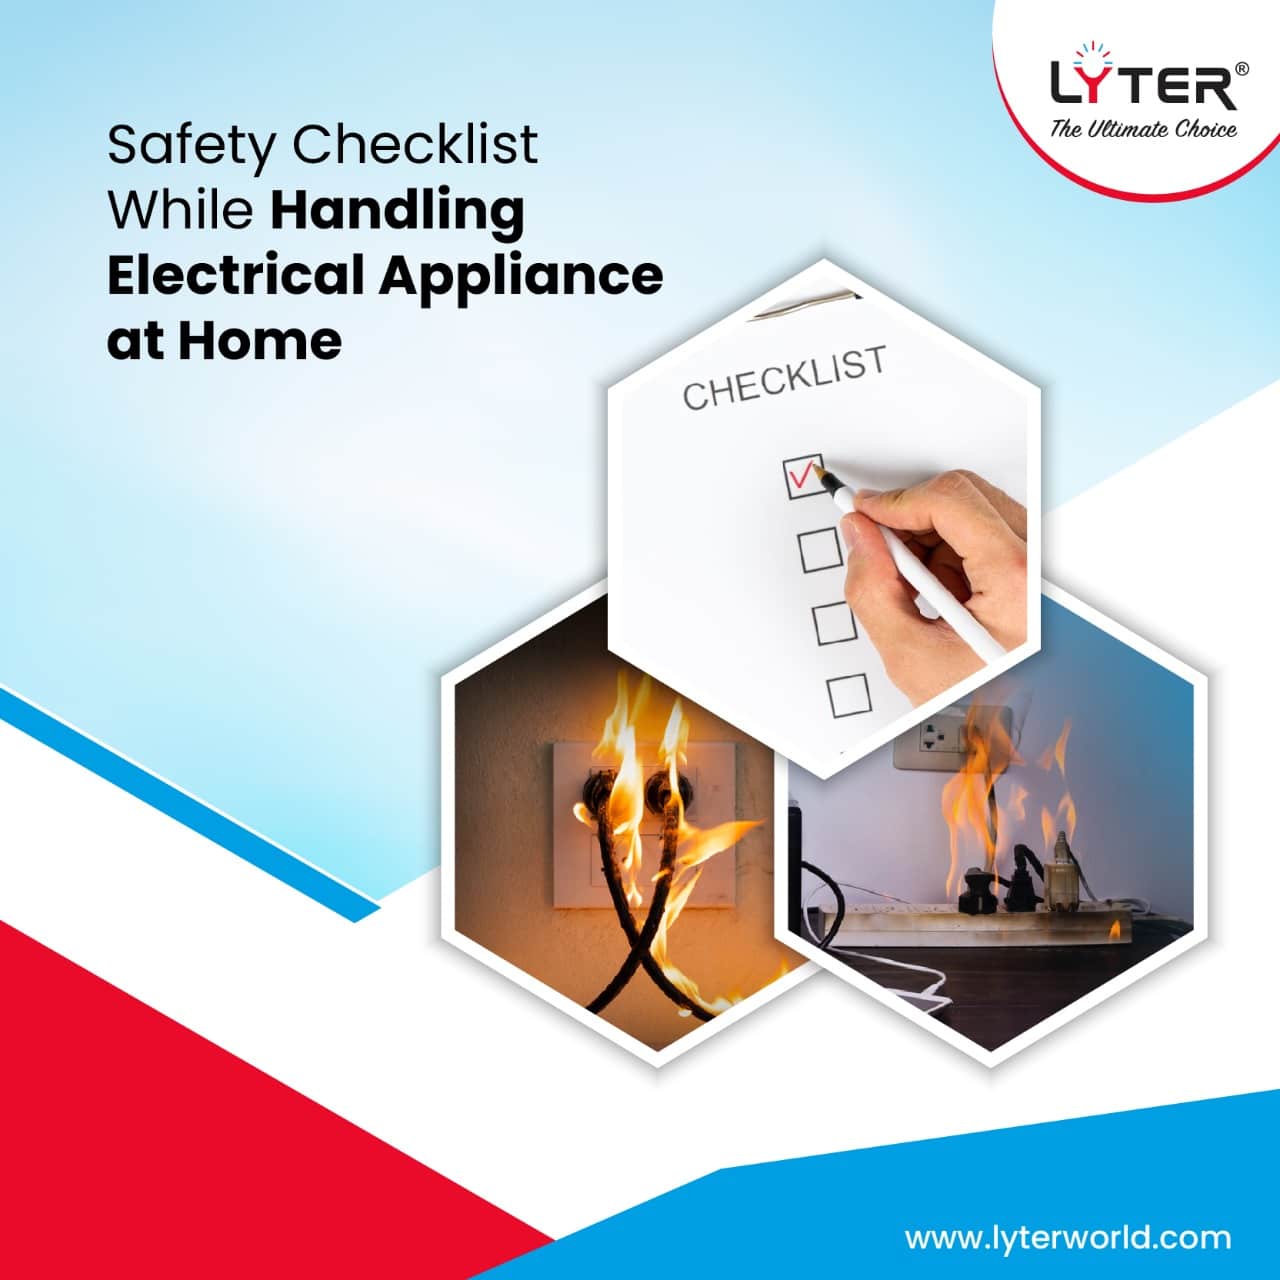 Safety Checklist While Handling Electrical Appliance